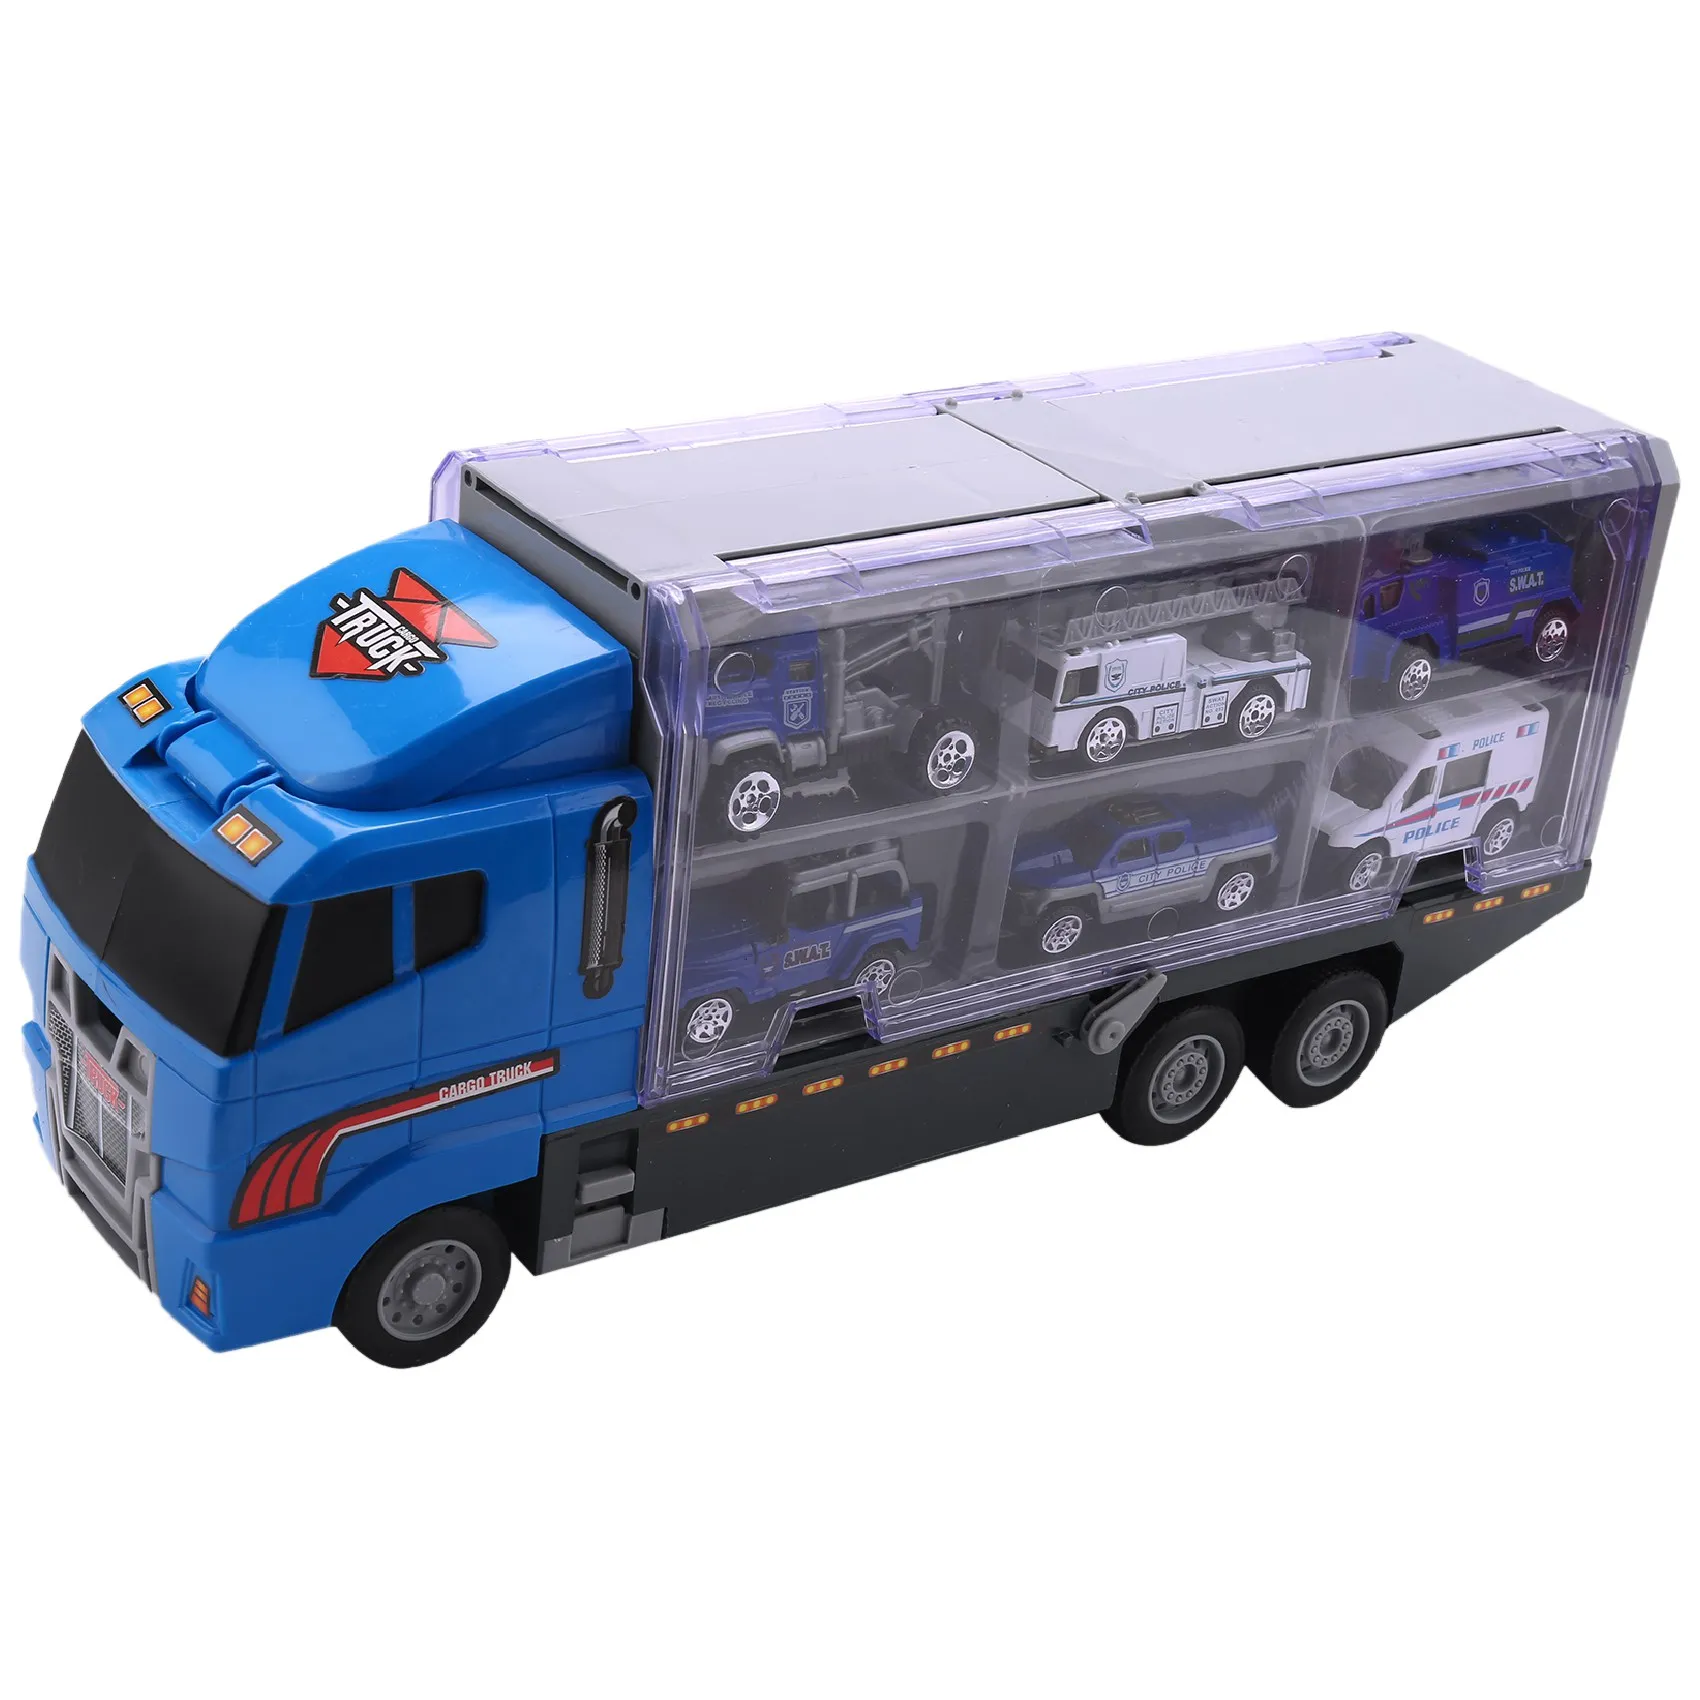 

10-In-1 Police Transport Truck Mini Die-Cast Toy Car Loaded Car Toy Set